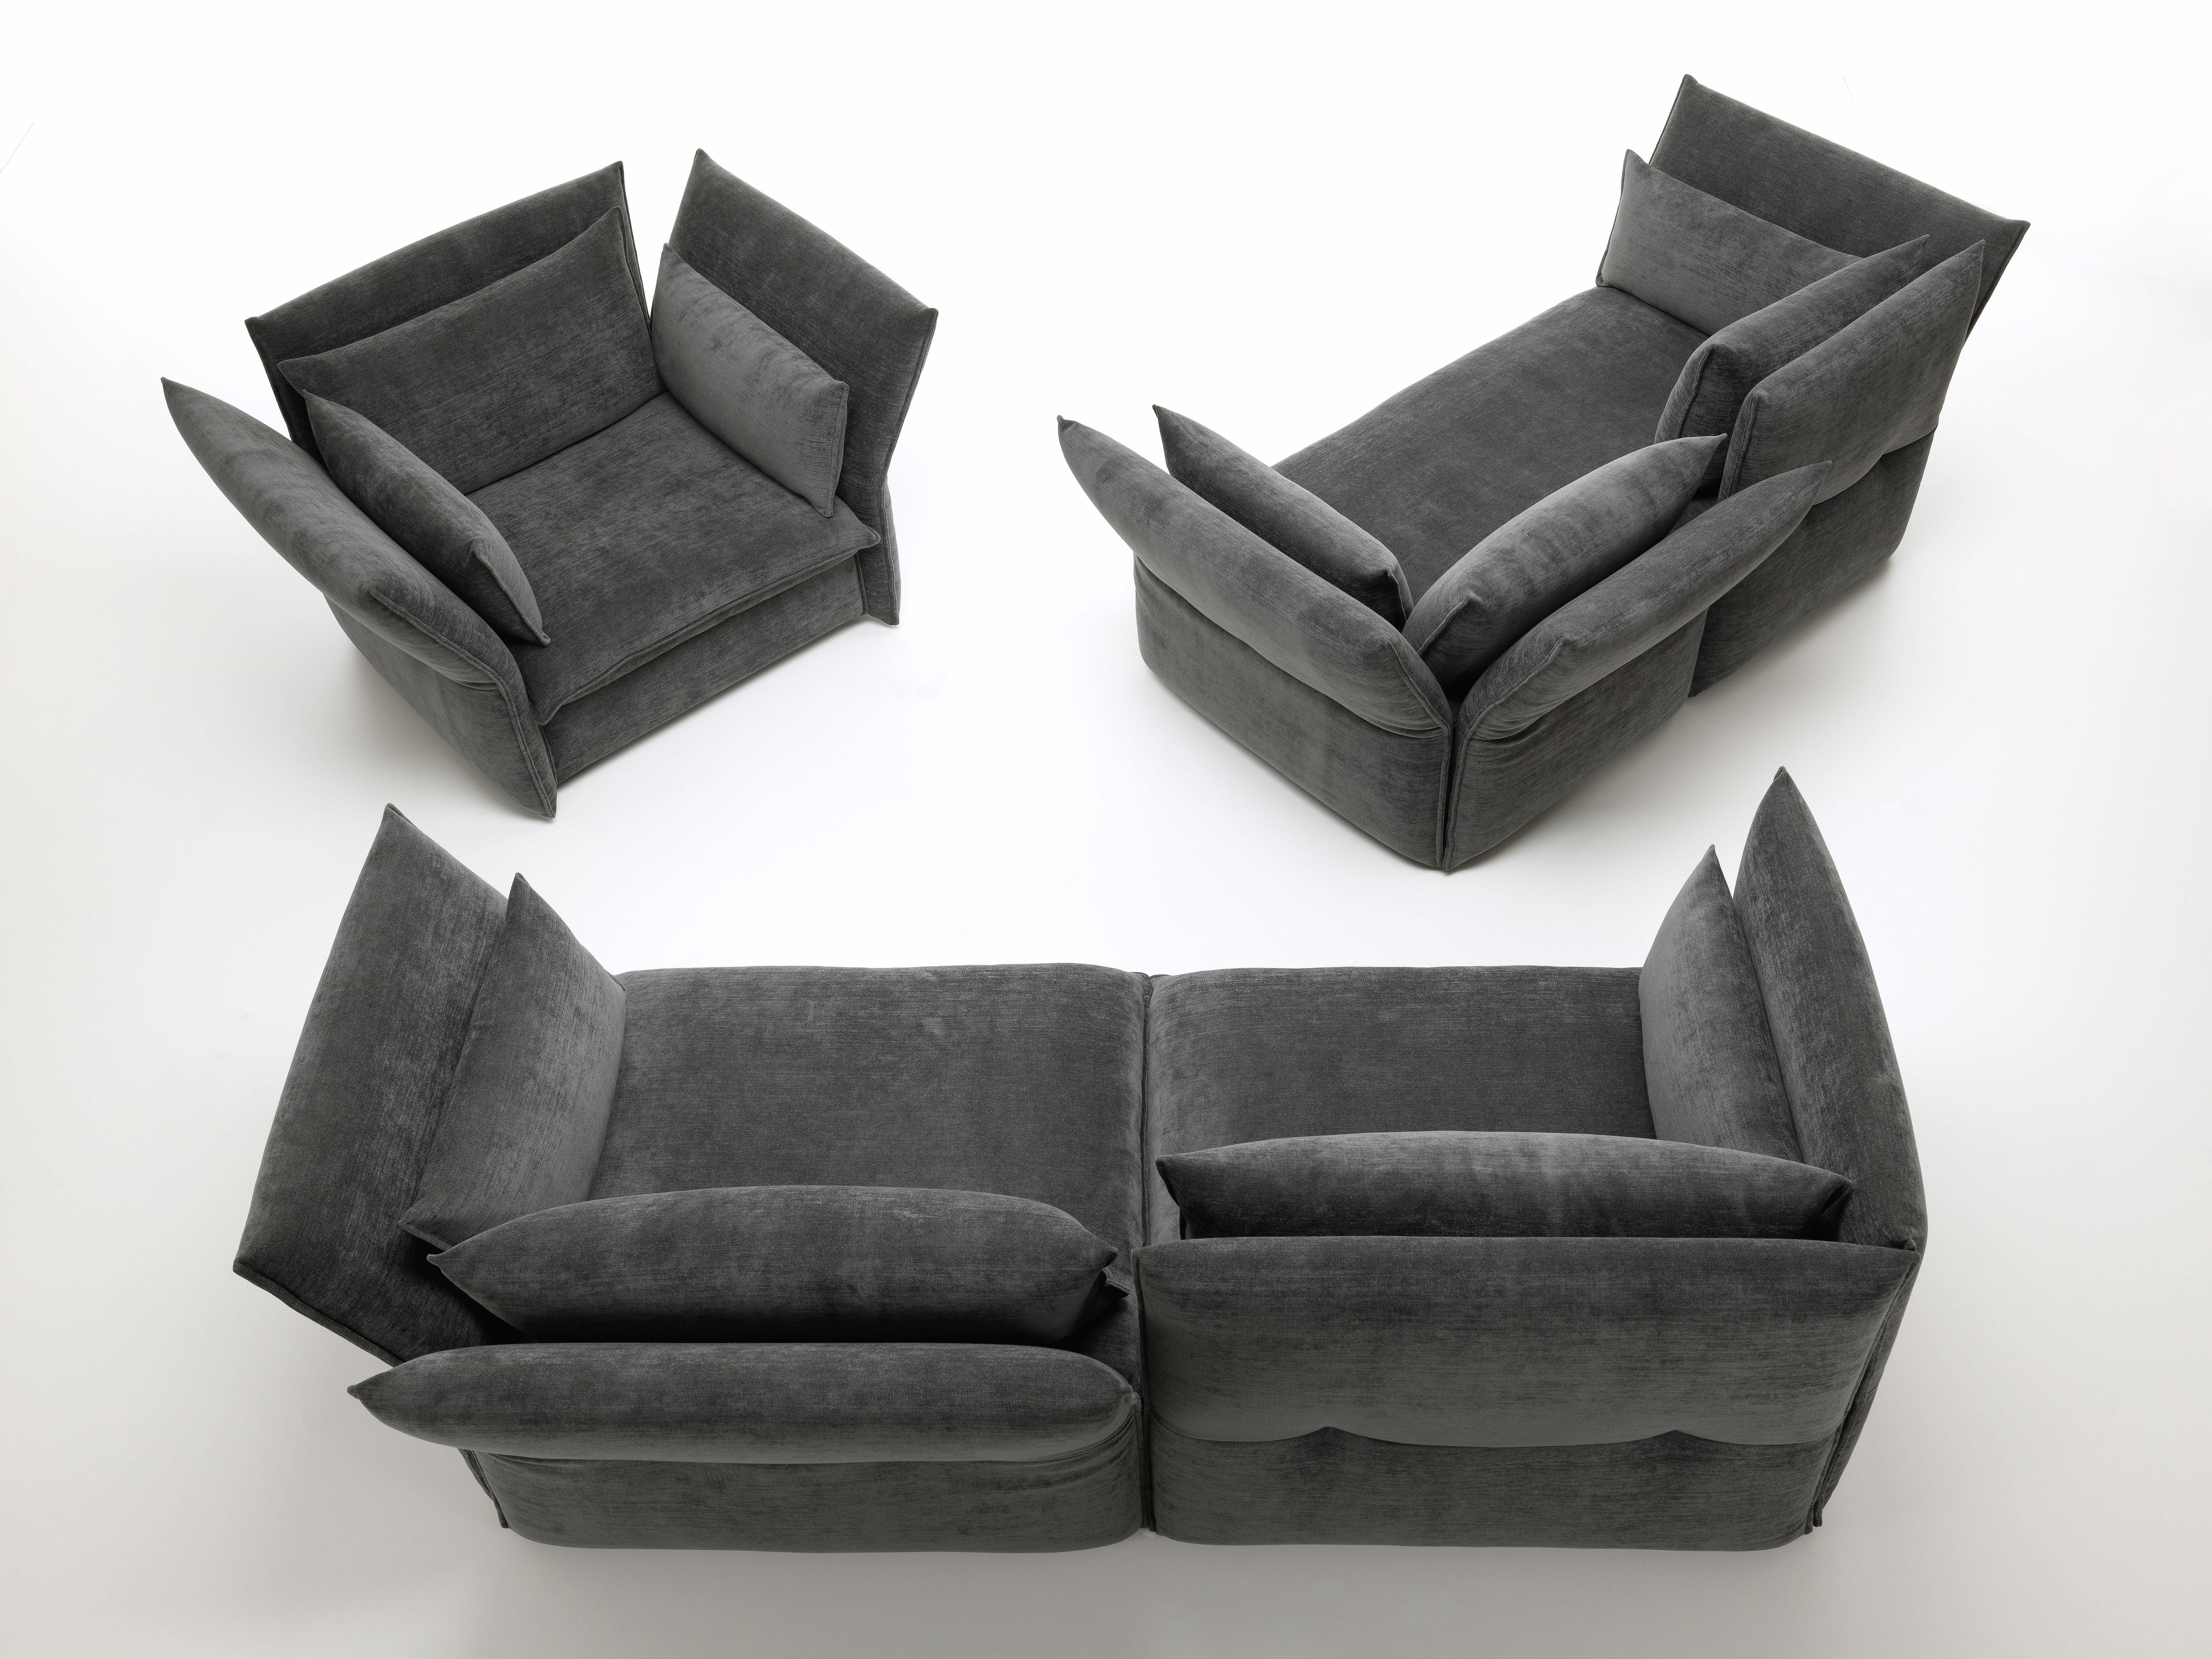 The Mariposa loveseat radiates spacious cosines and yet has an understated feel due to its well-balanced proportions. Its pleasantly soft upholstery provides extraordinary comfort: the user sinks into its sea of cushions with not a hard surface to